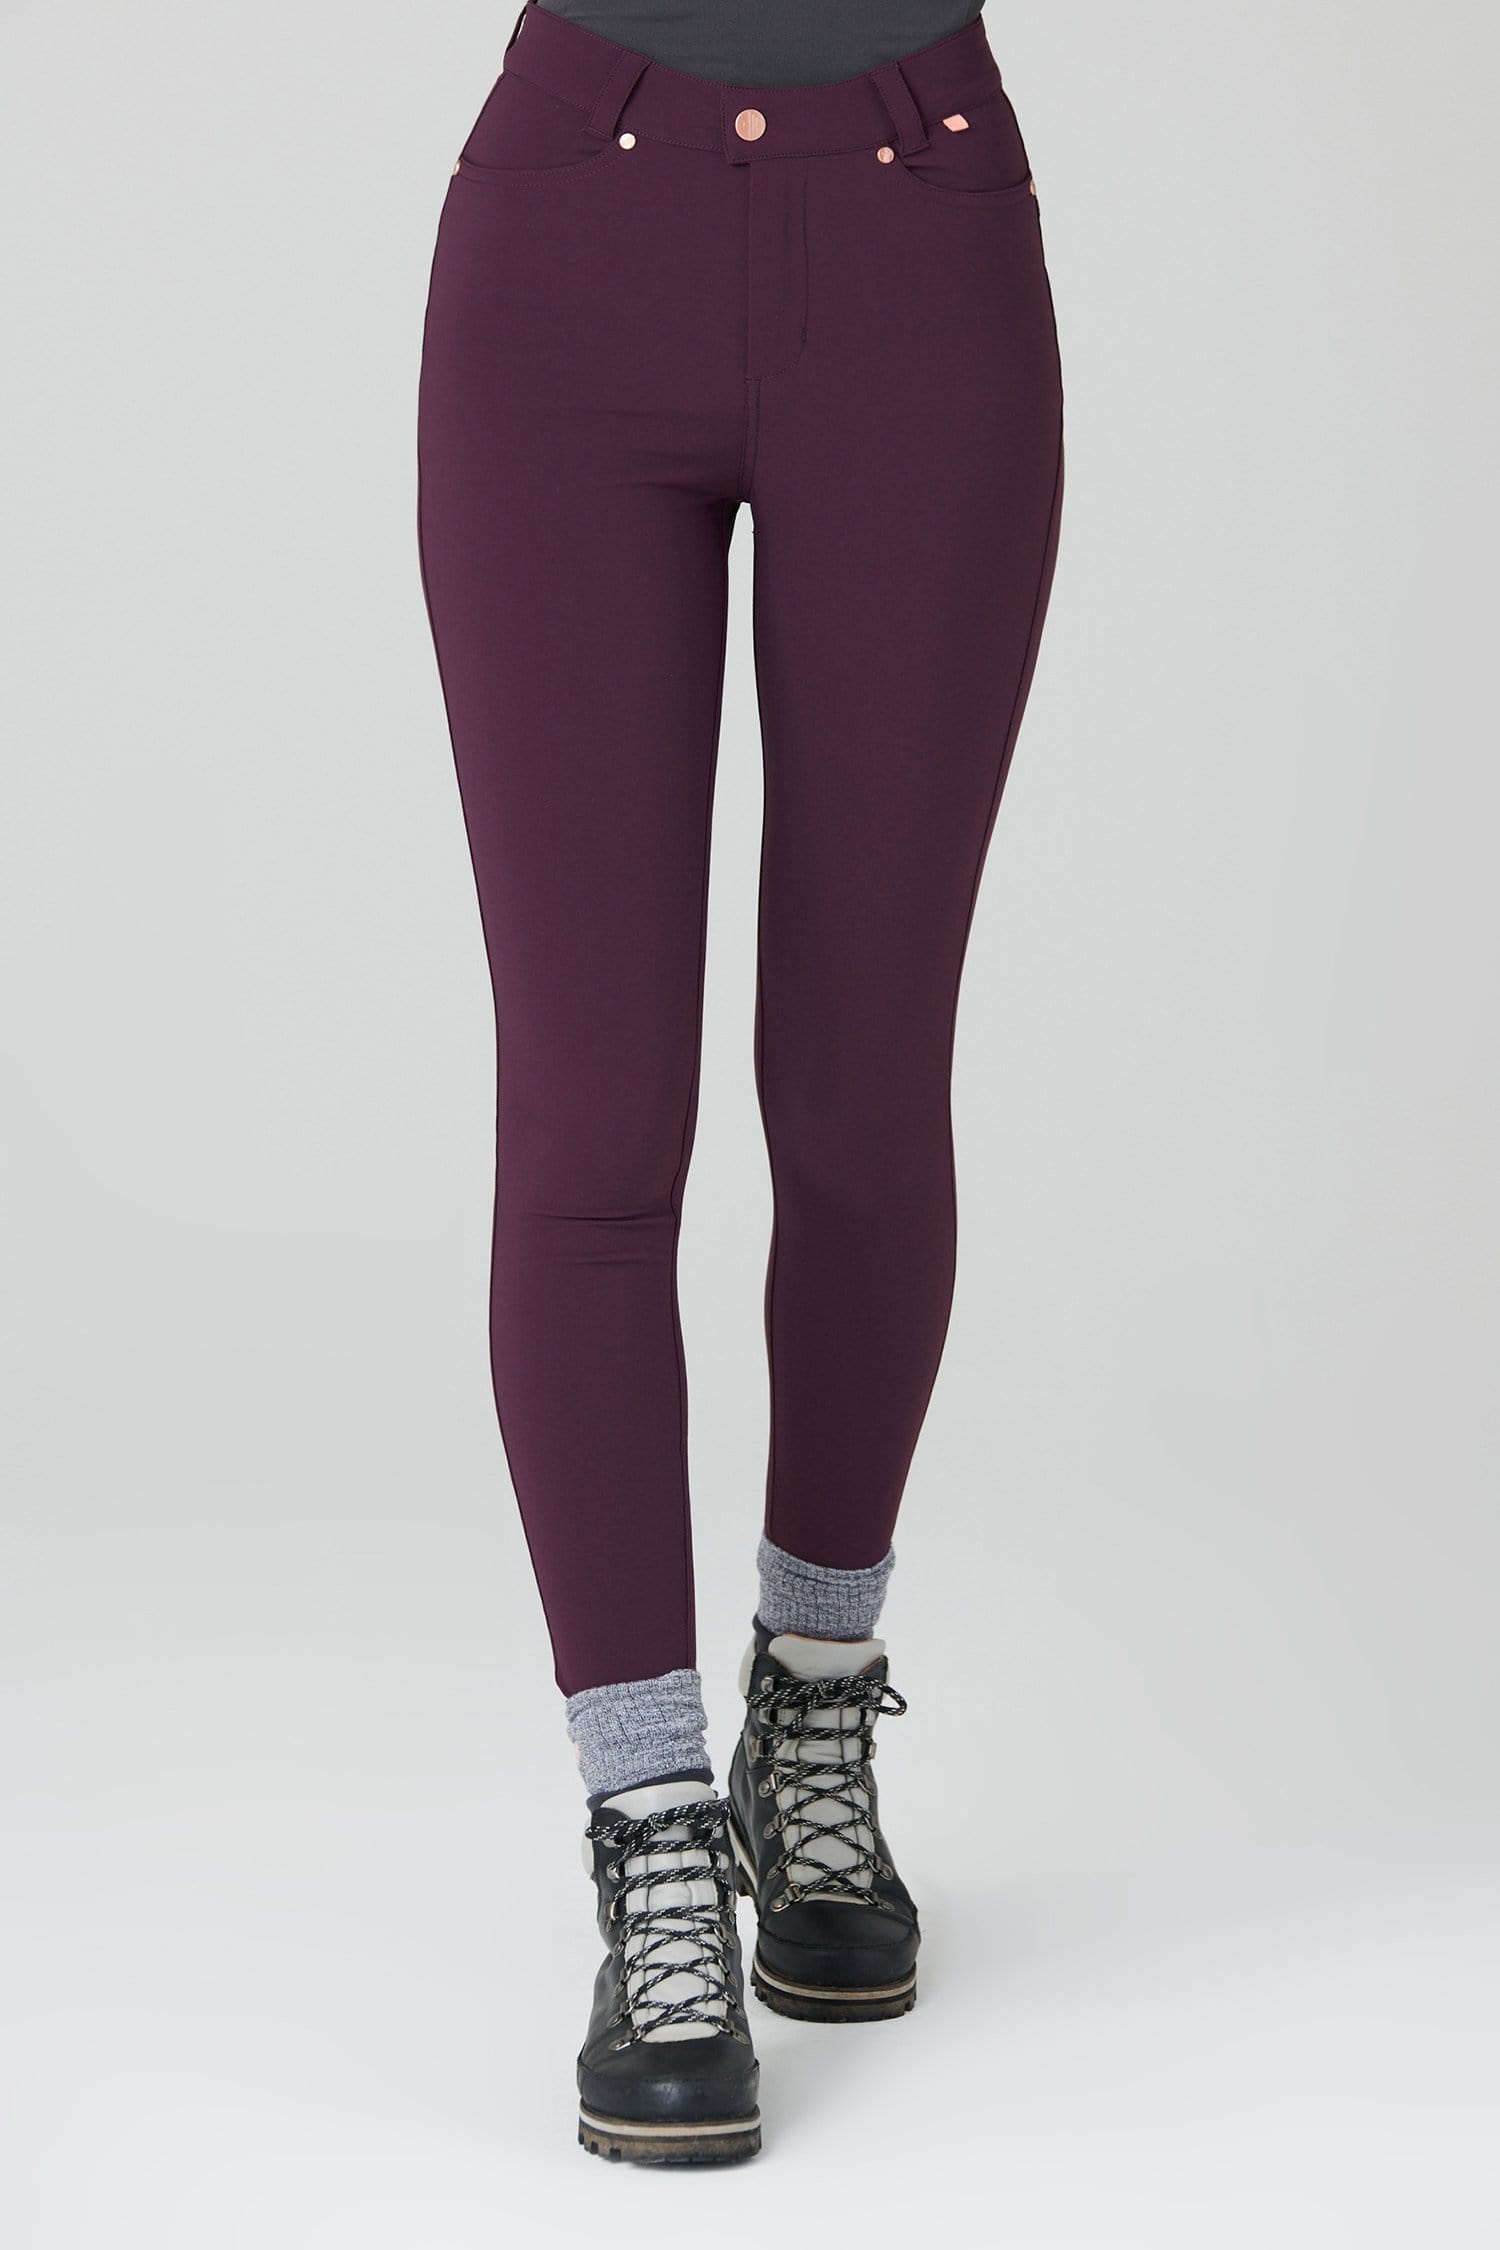 Max Stretch Skinny Outdoor Trousers - Aubergine - 26l / Uk8 - Womens - Acai Outdoorwear